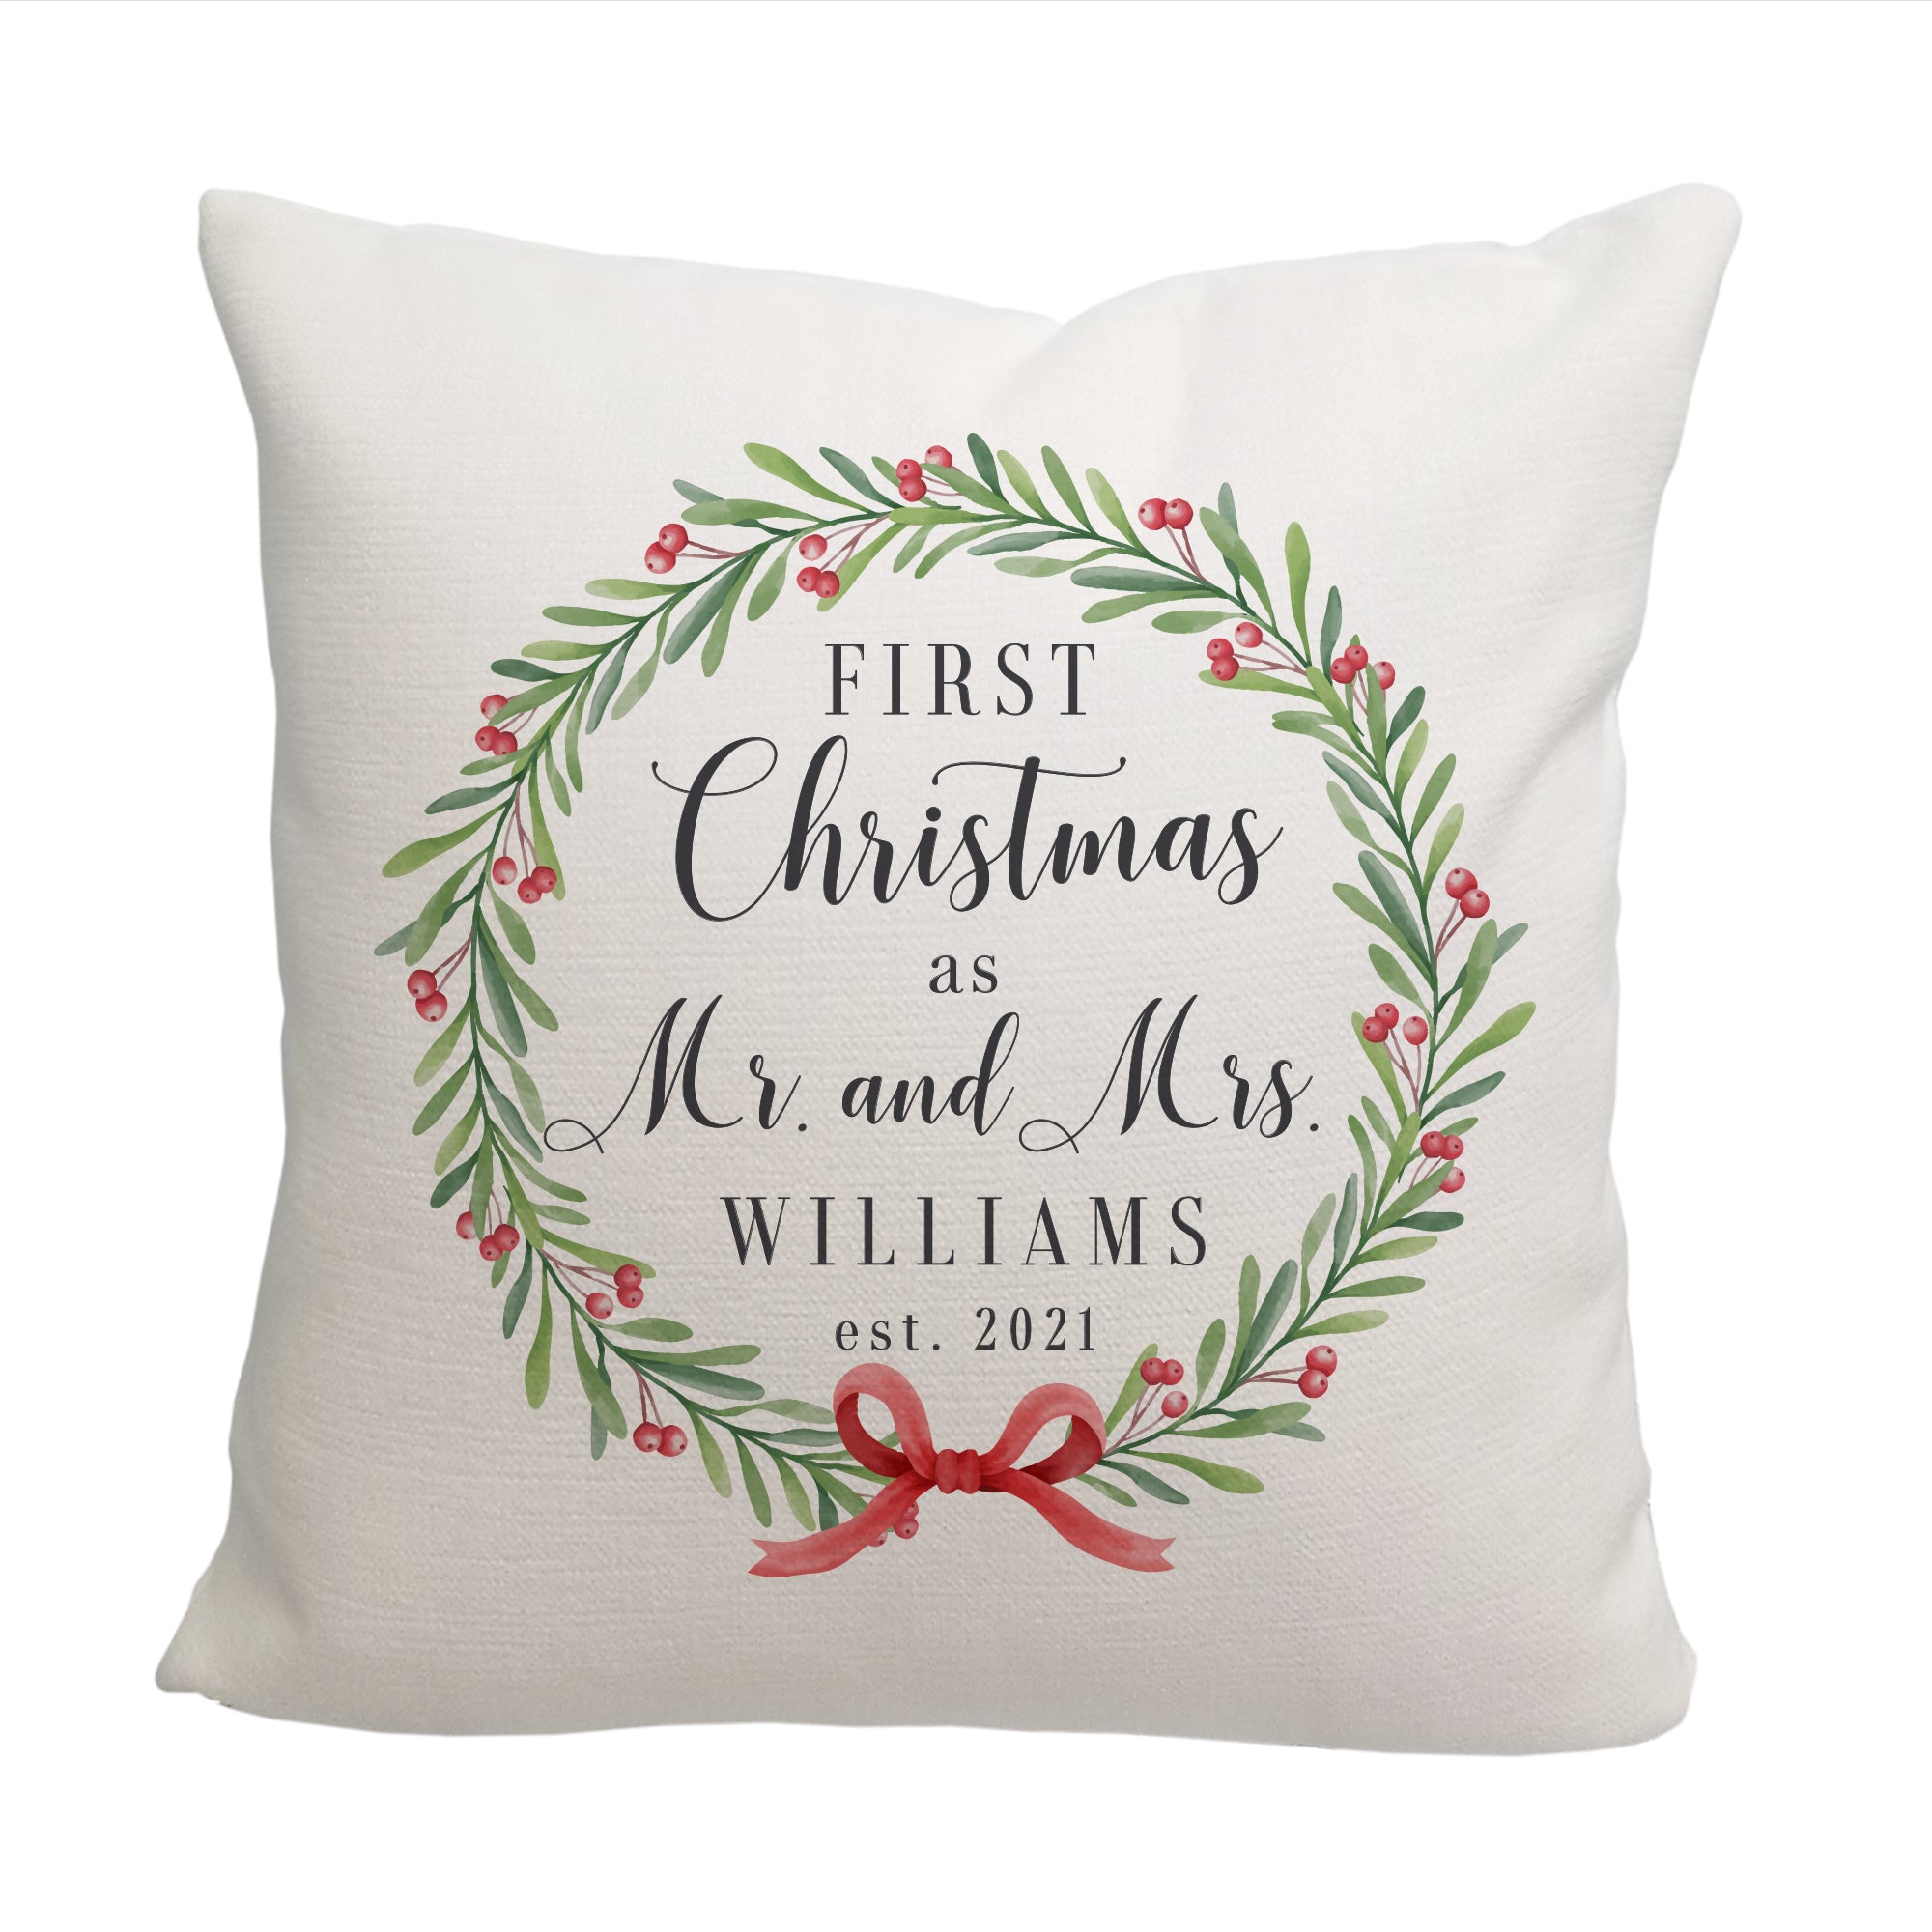 First Christmas as Mr. and Mrs. Throw Pillow - Cover Only OR Cover with Insert